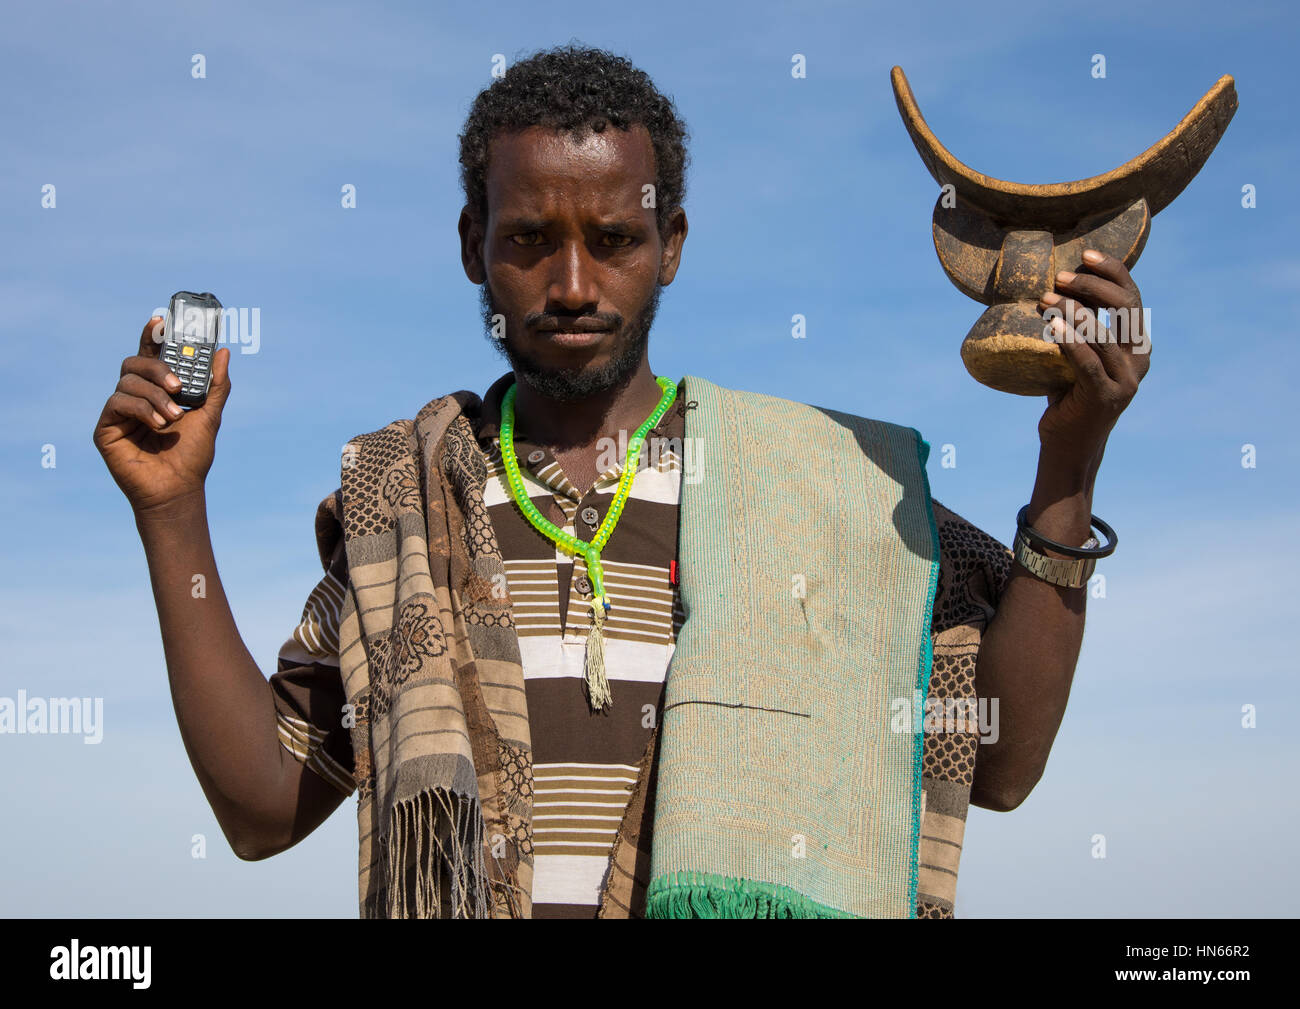 Issa tribe man holding a mobile phone and a wooden pillow, Afar region, Yangudi Rassa National Park, Ethiopia Stock Photo